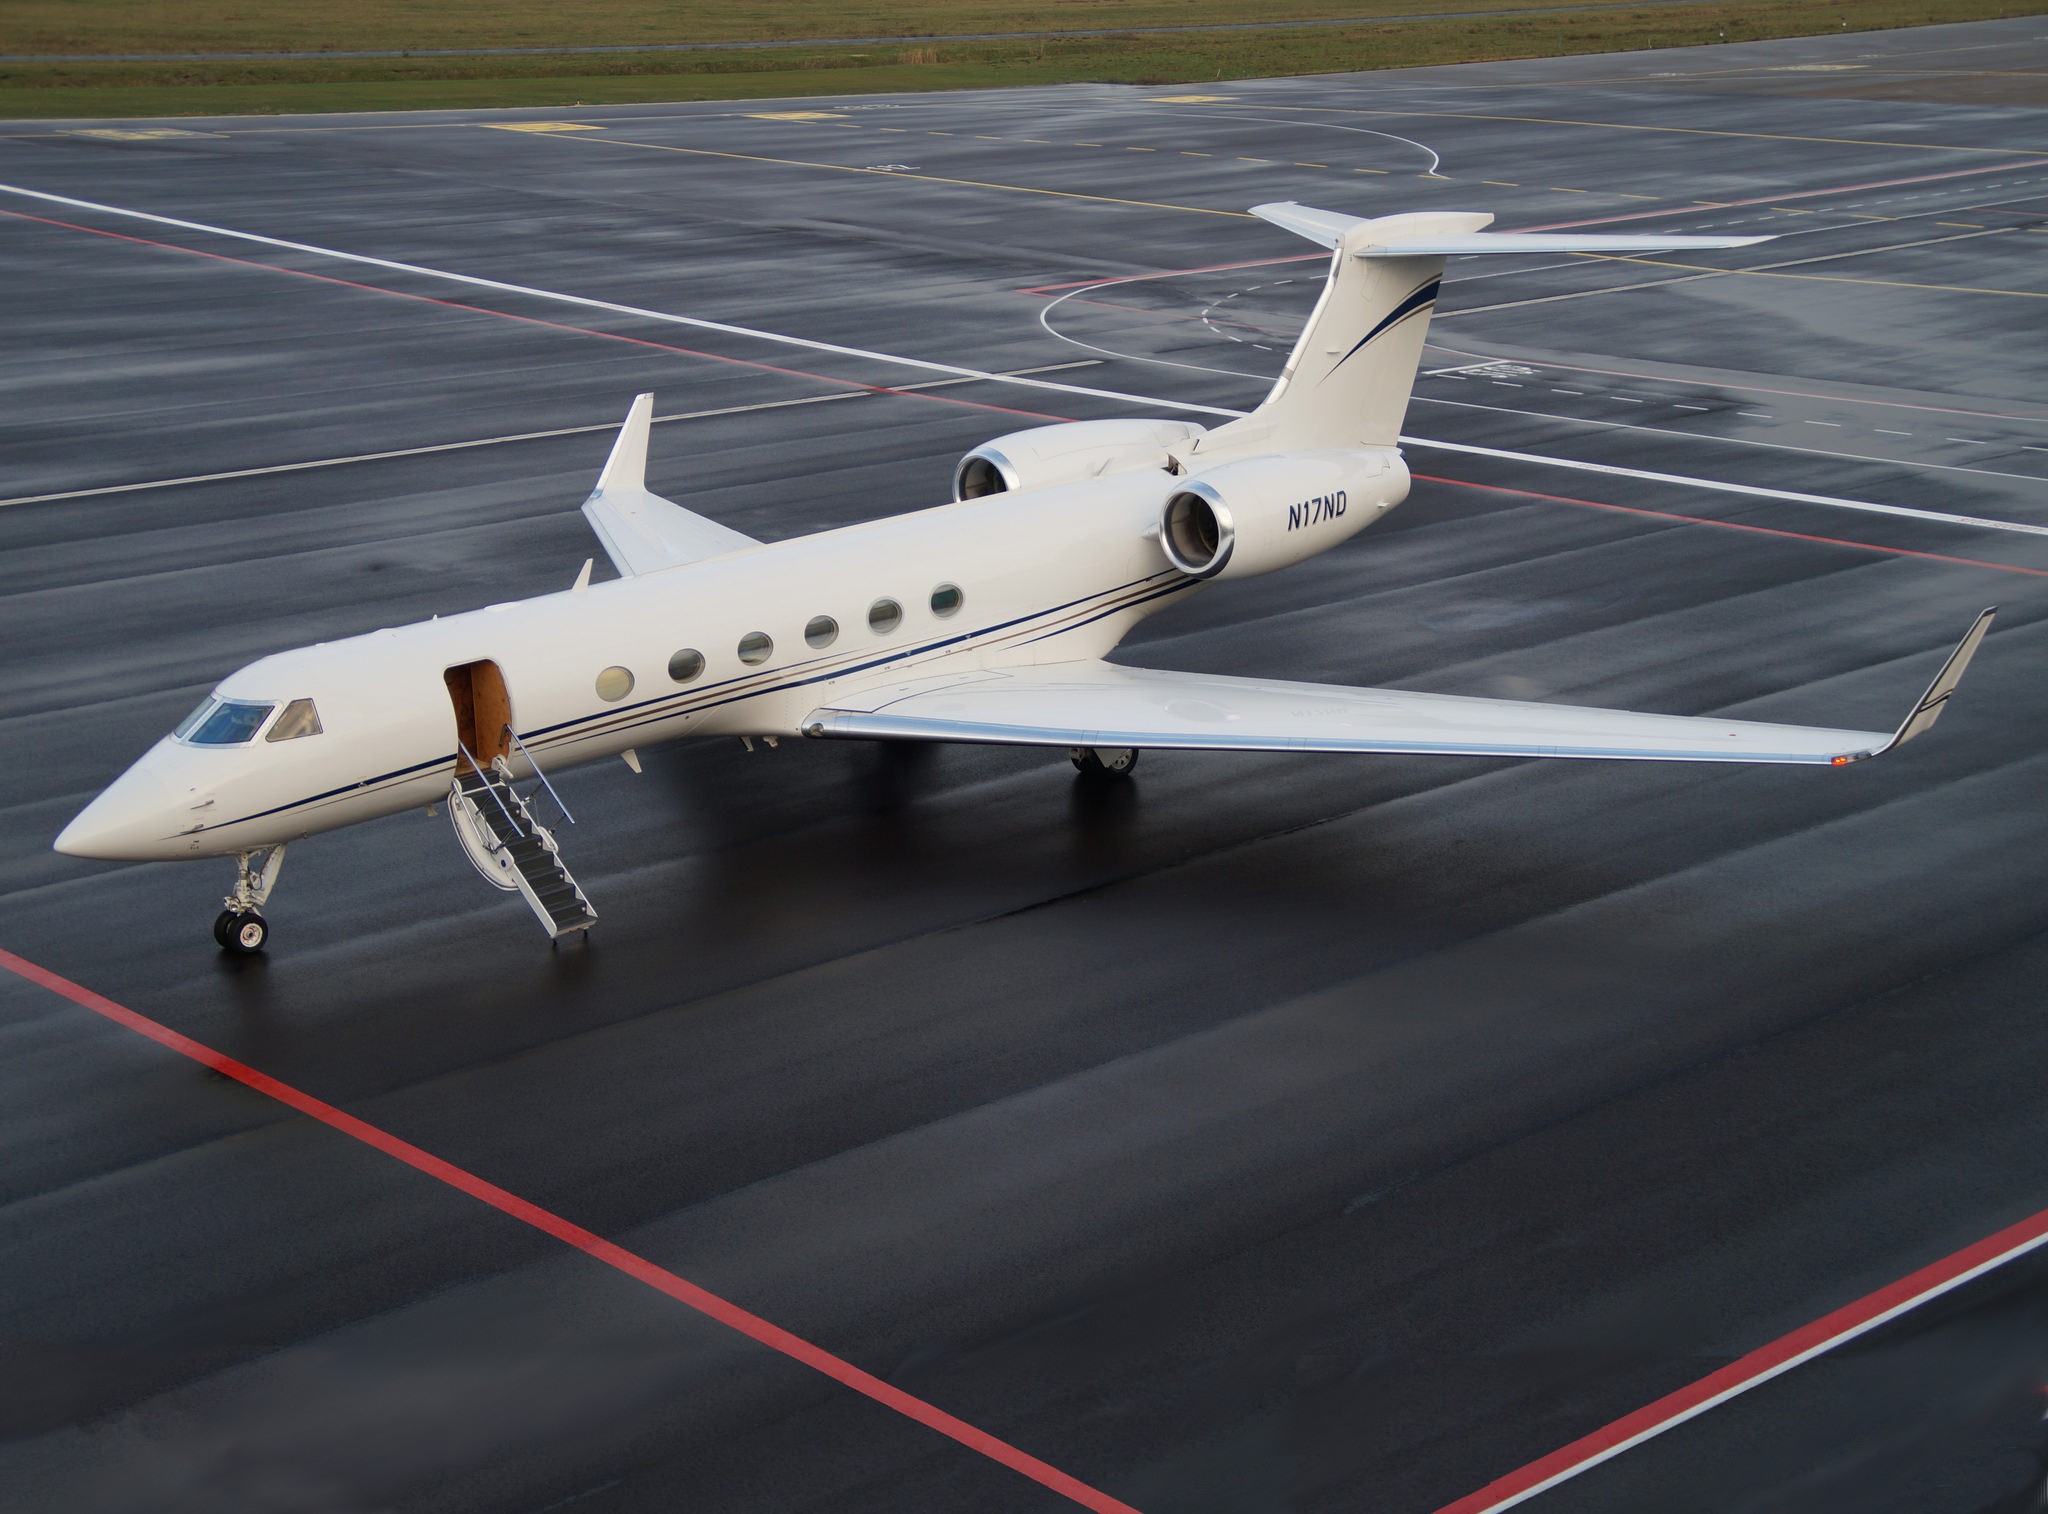 Gulfstream V, SN 518 For Sale or Lease